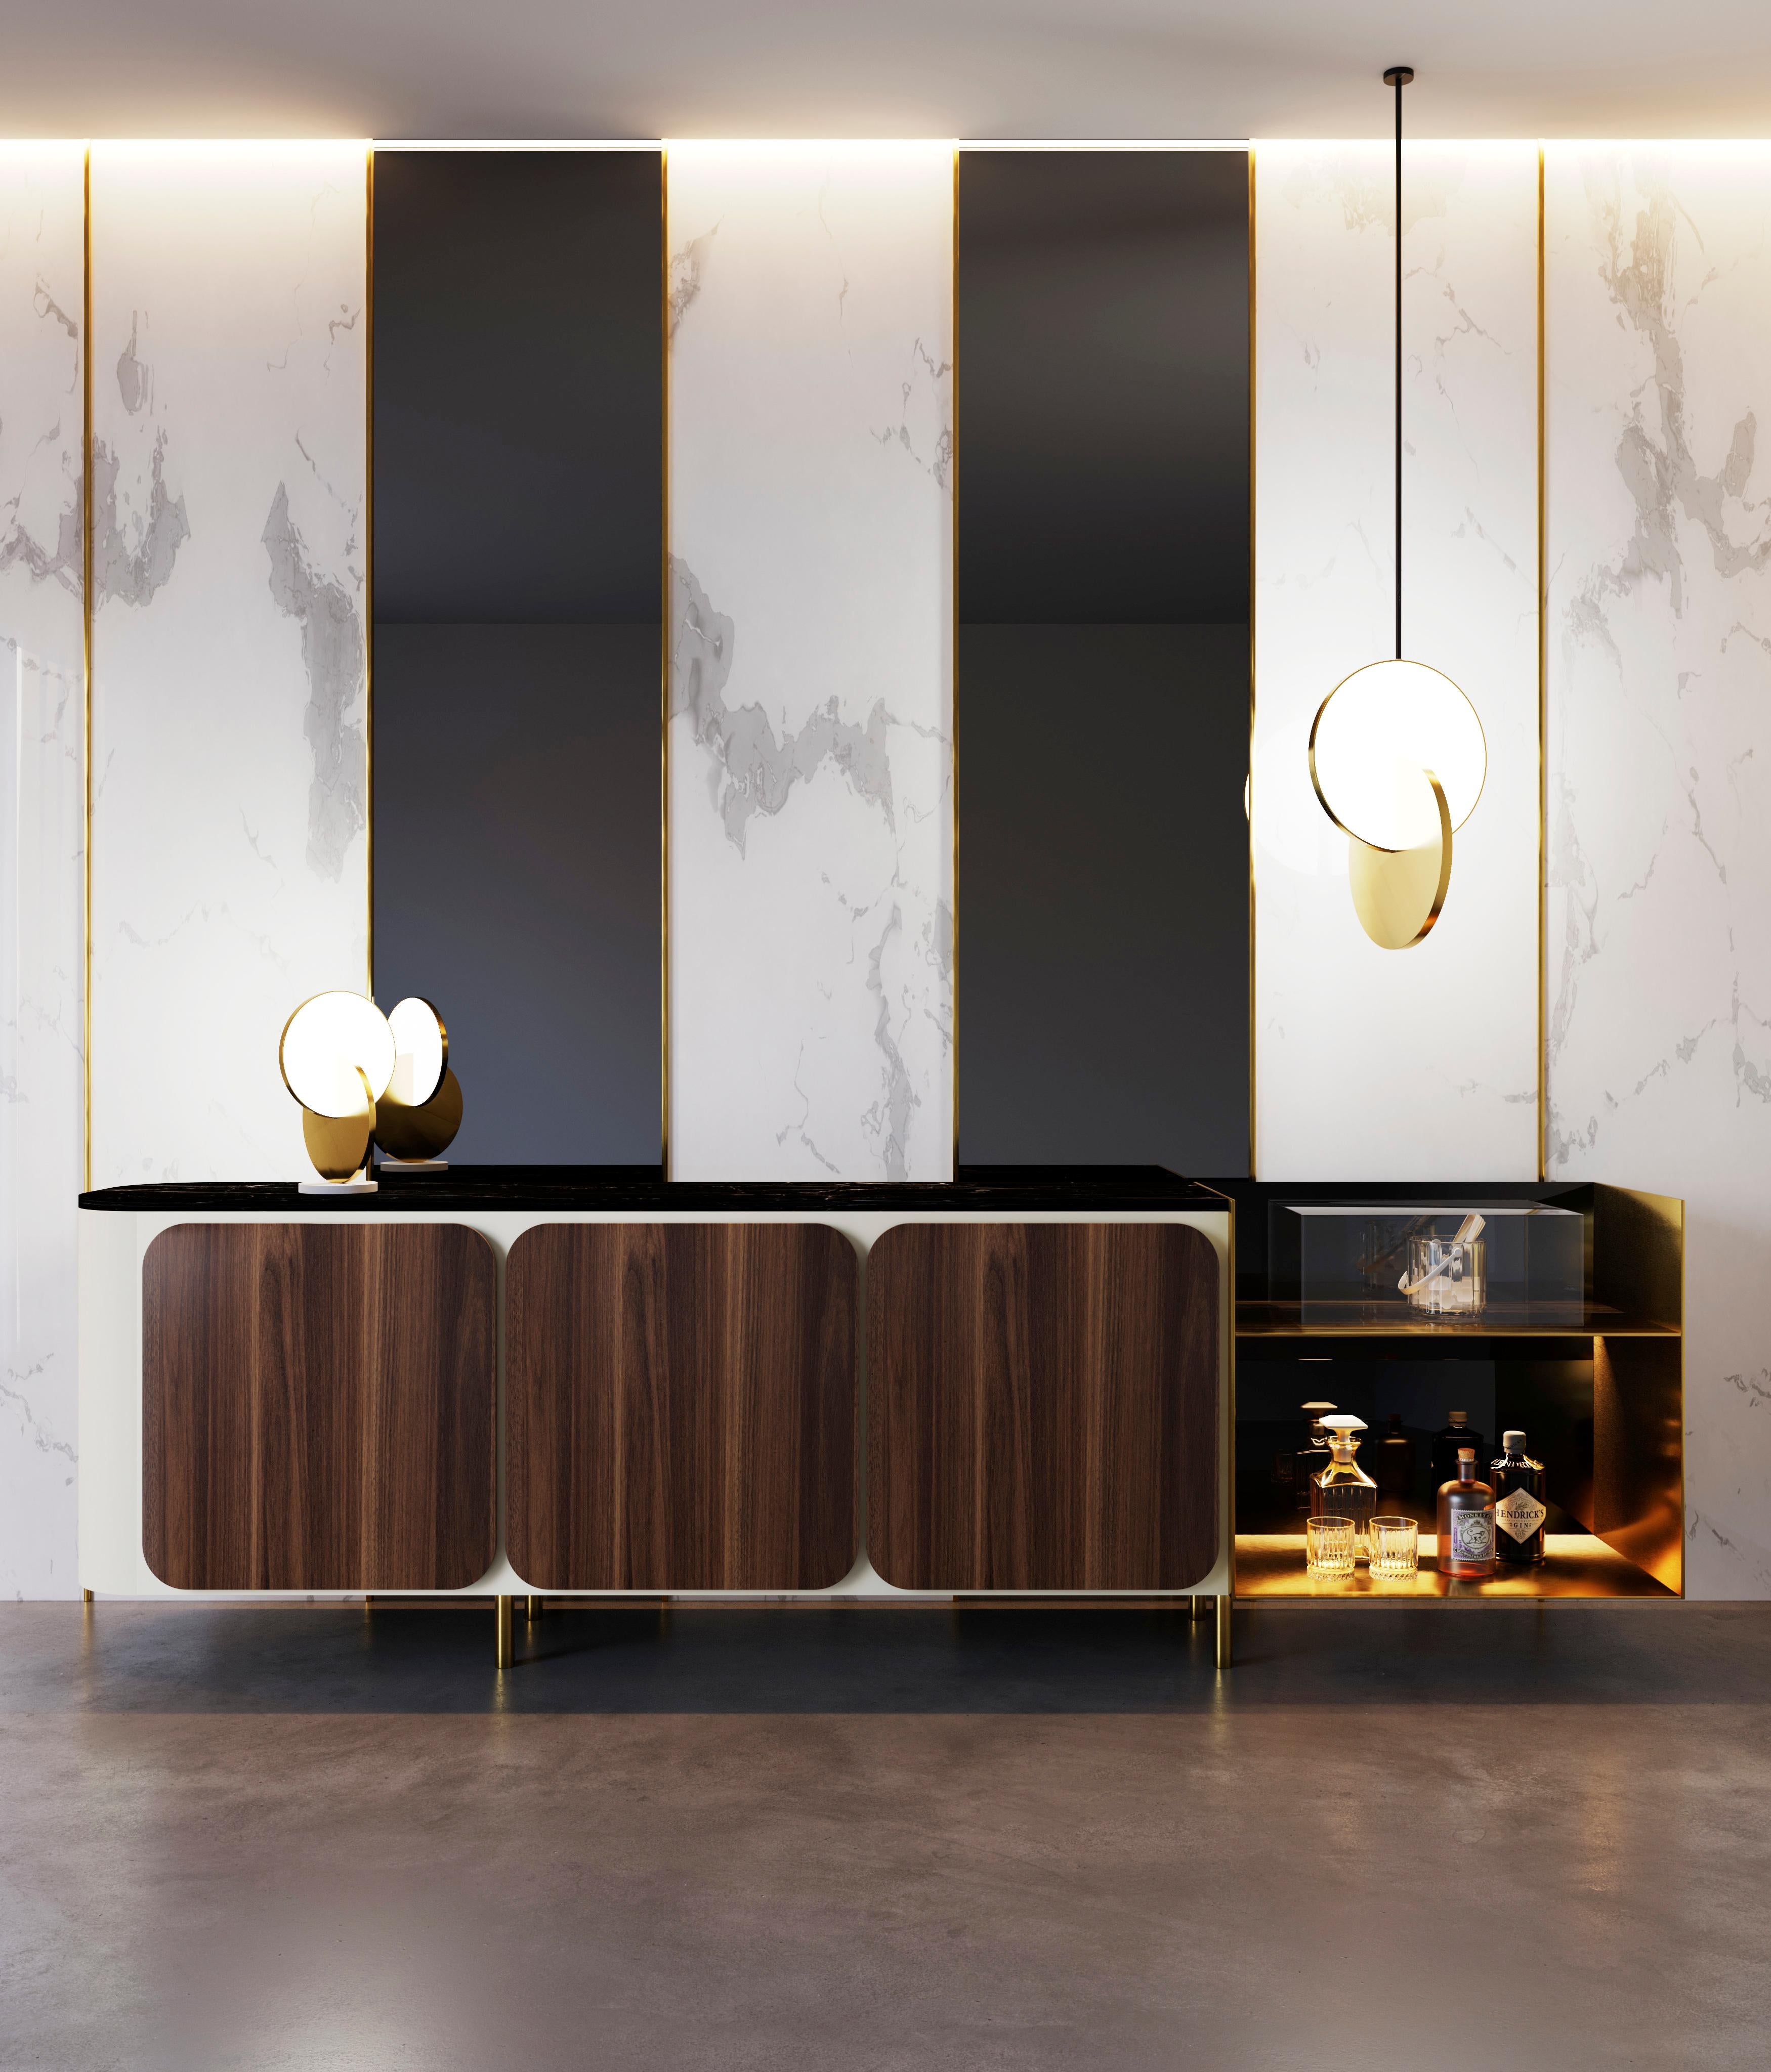 Shelby Sideboard, Portuguese 21st Century Contemporary In New Condition For Sale In Sobrosa, 13